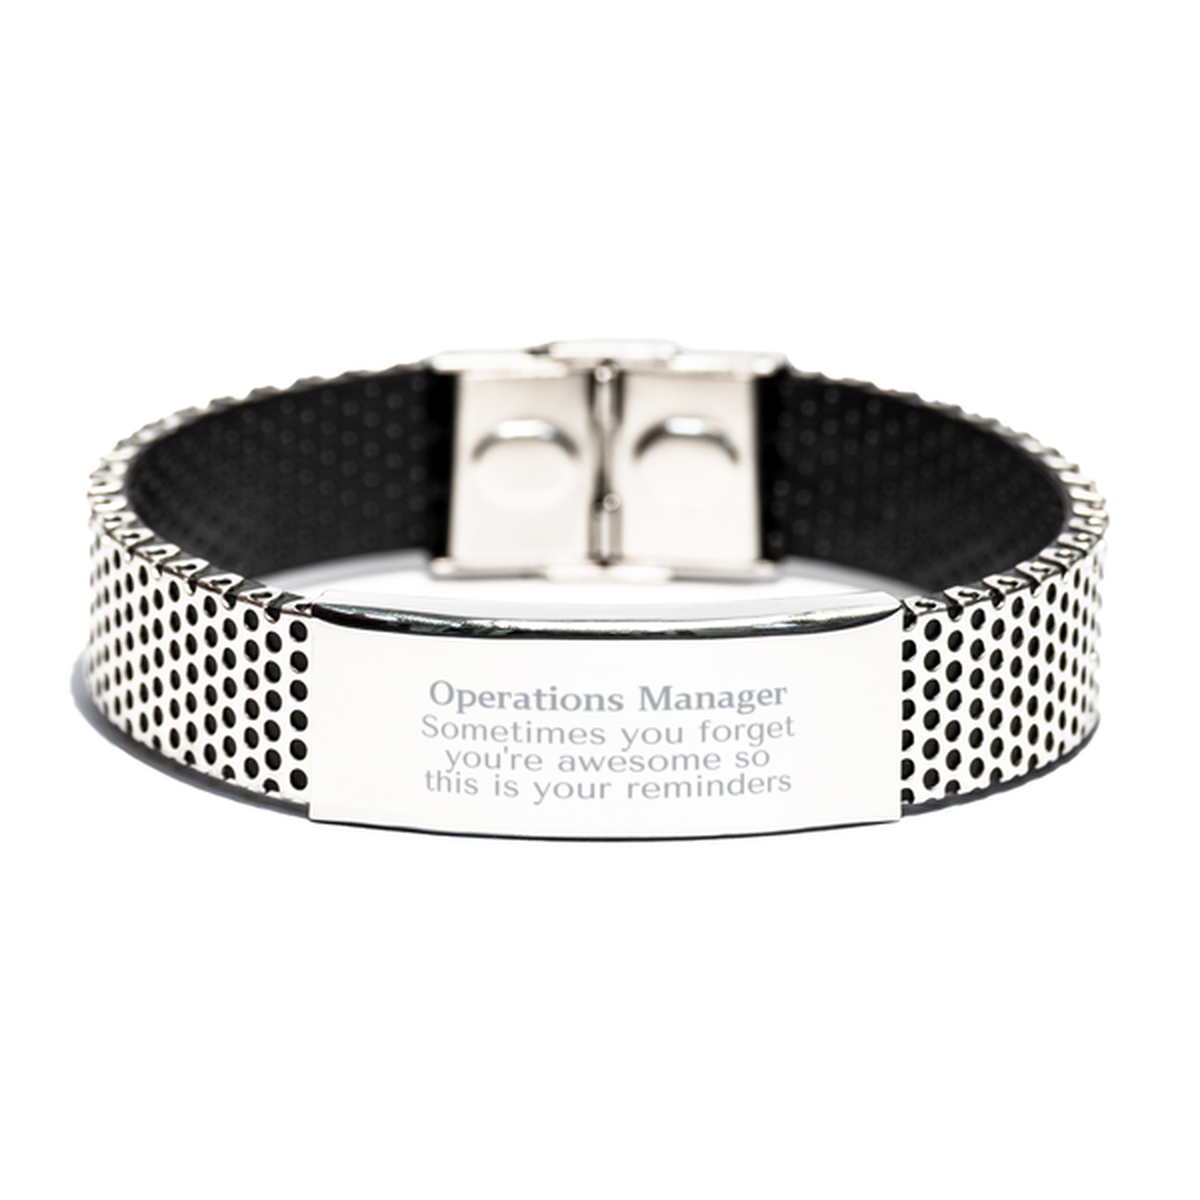 Sentimental Operations Manager Stainless Steel Bracelet, Operations Manager Sometimes you forget you're awesome so this is your reminders, Graduation Christmas Birthday Gifts for Operations Manager, Men, Women, Coworkers